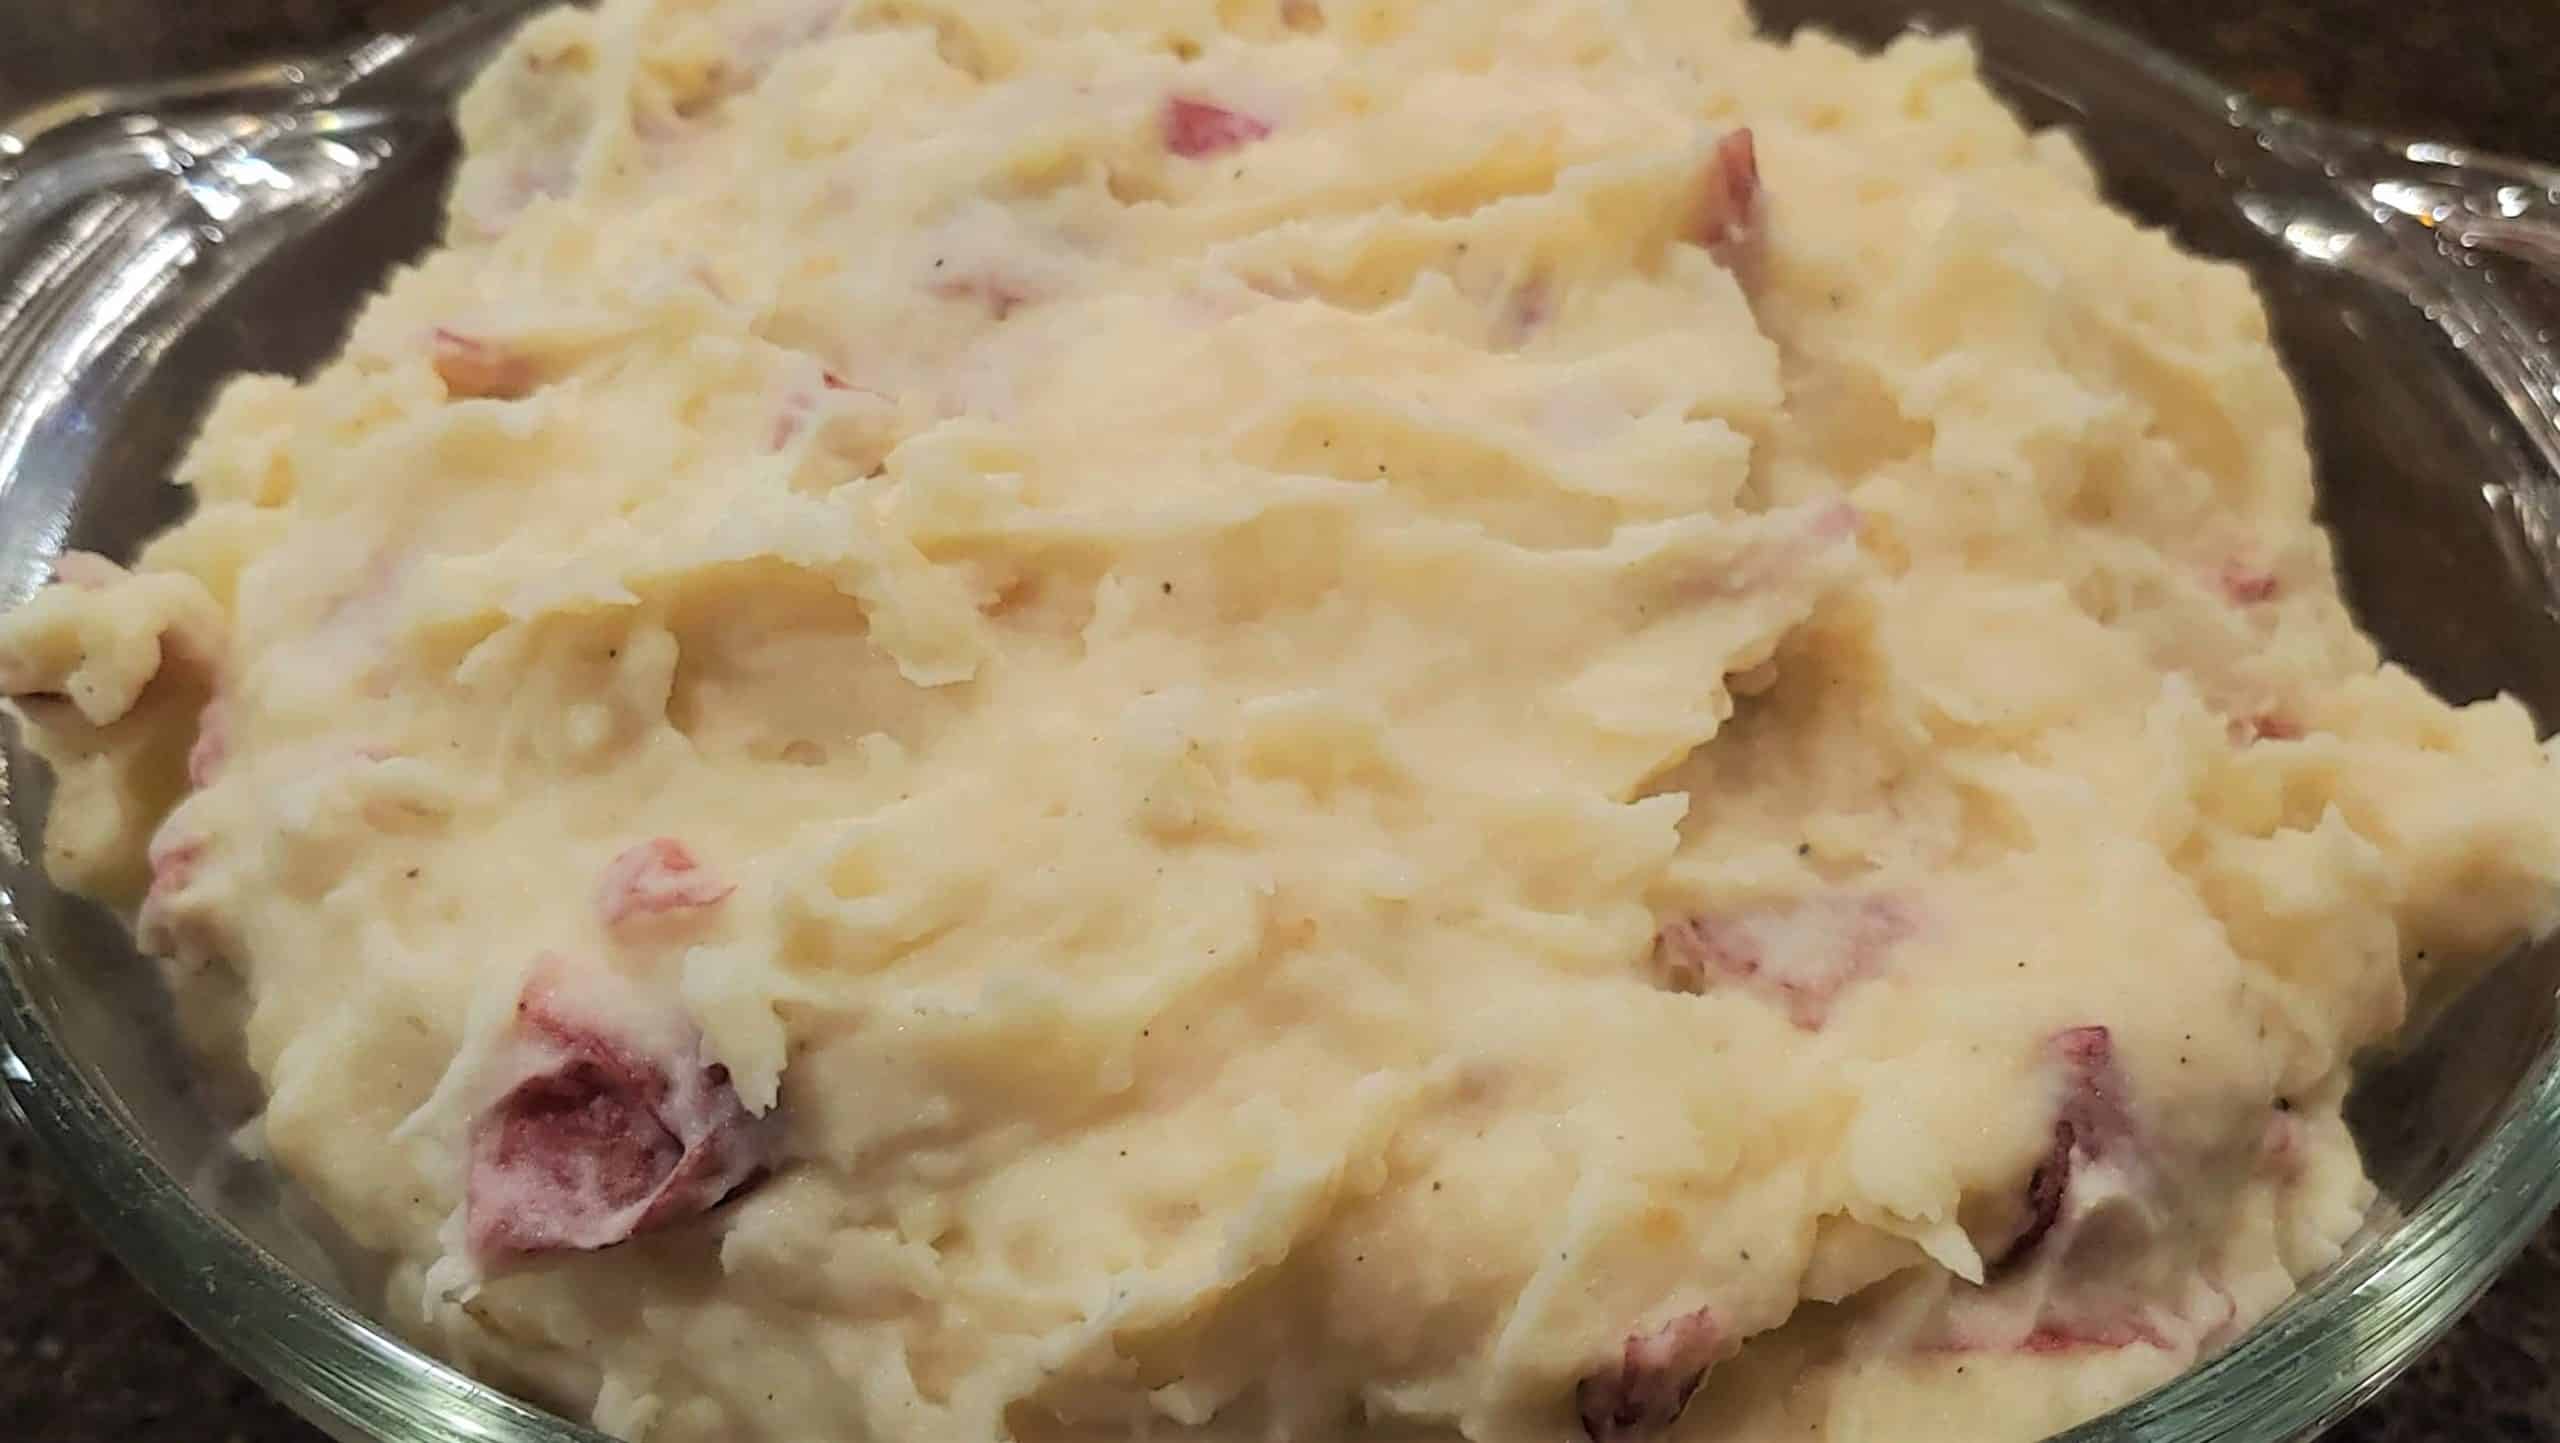 Mashed Red Potatoes with Skins - Dining in with Danielle